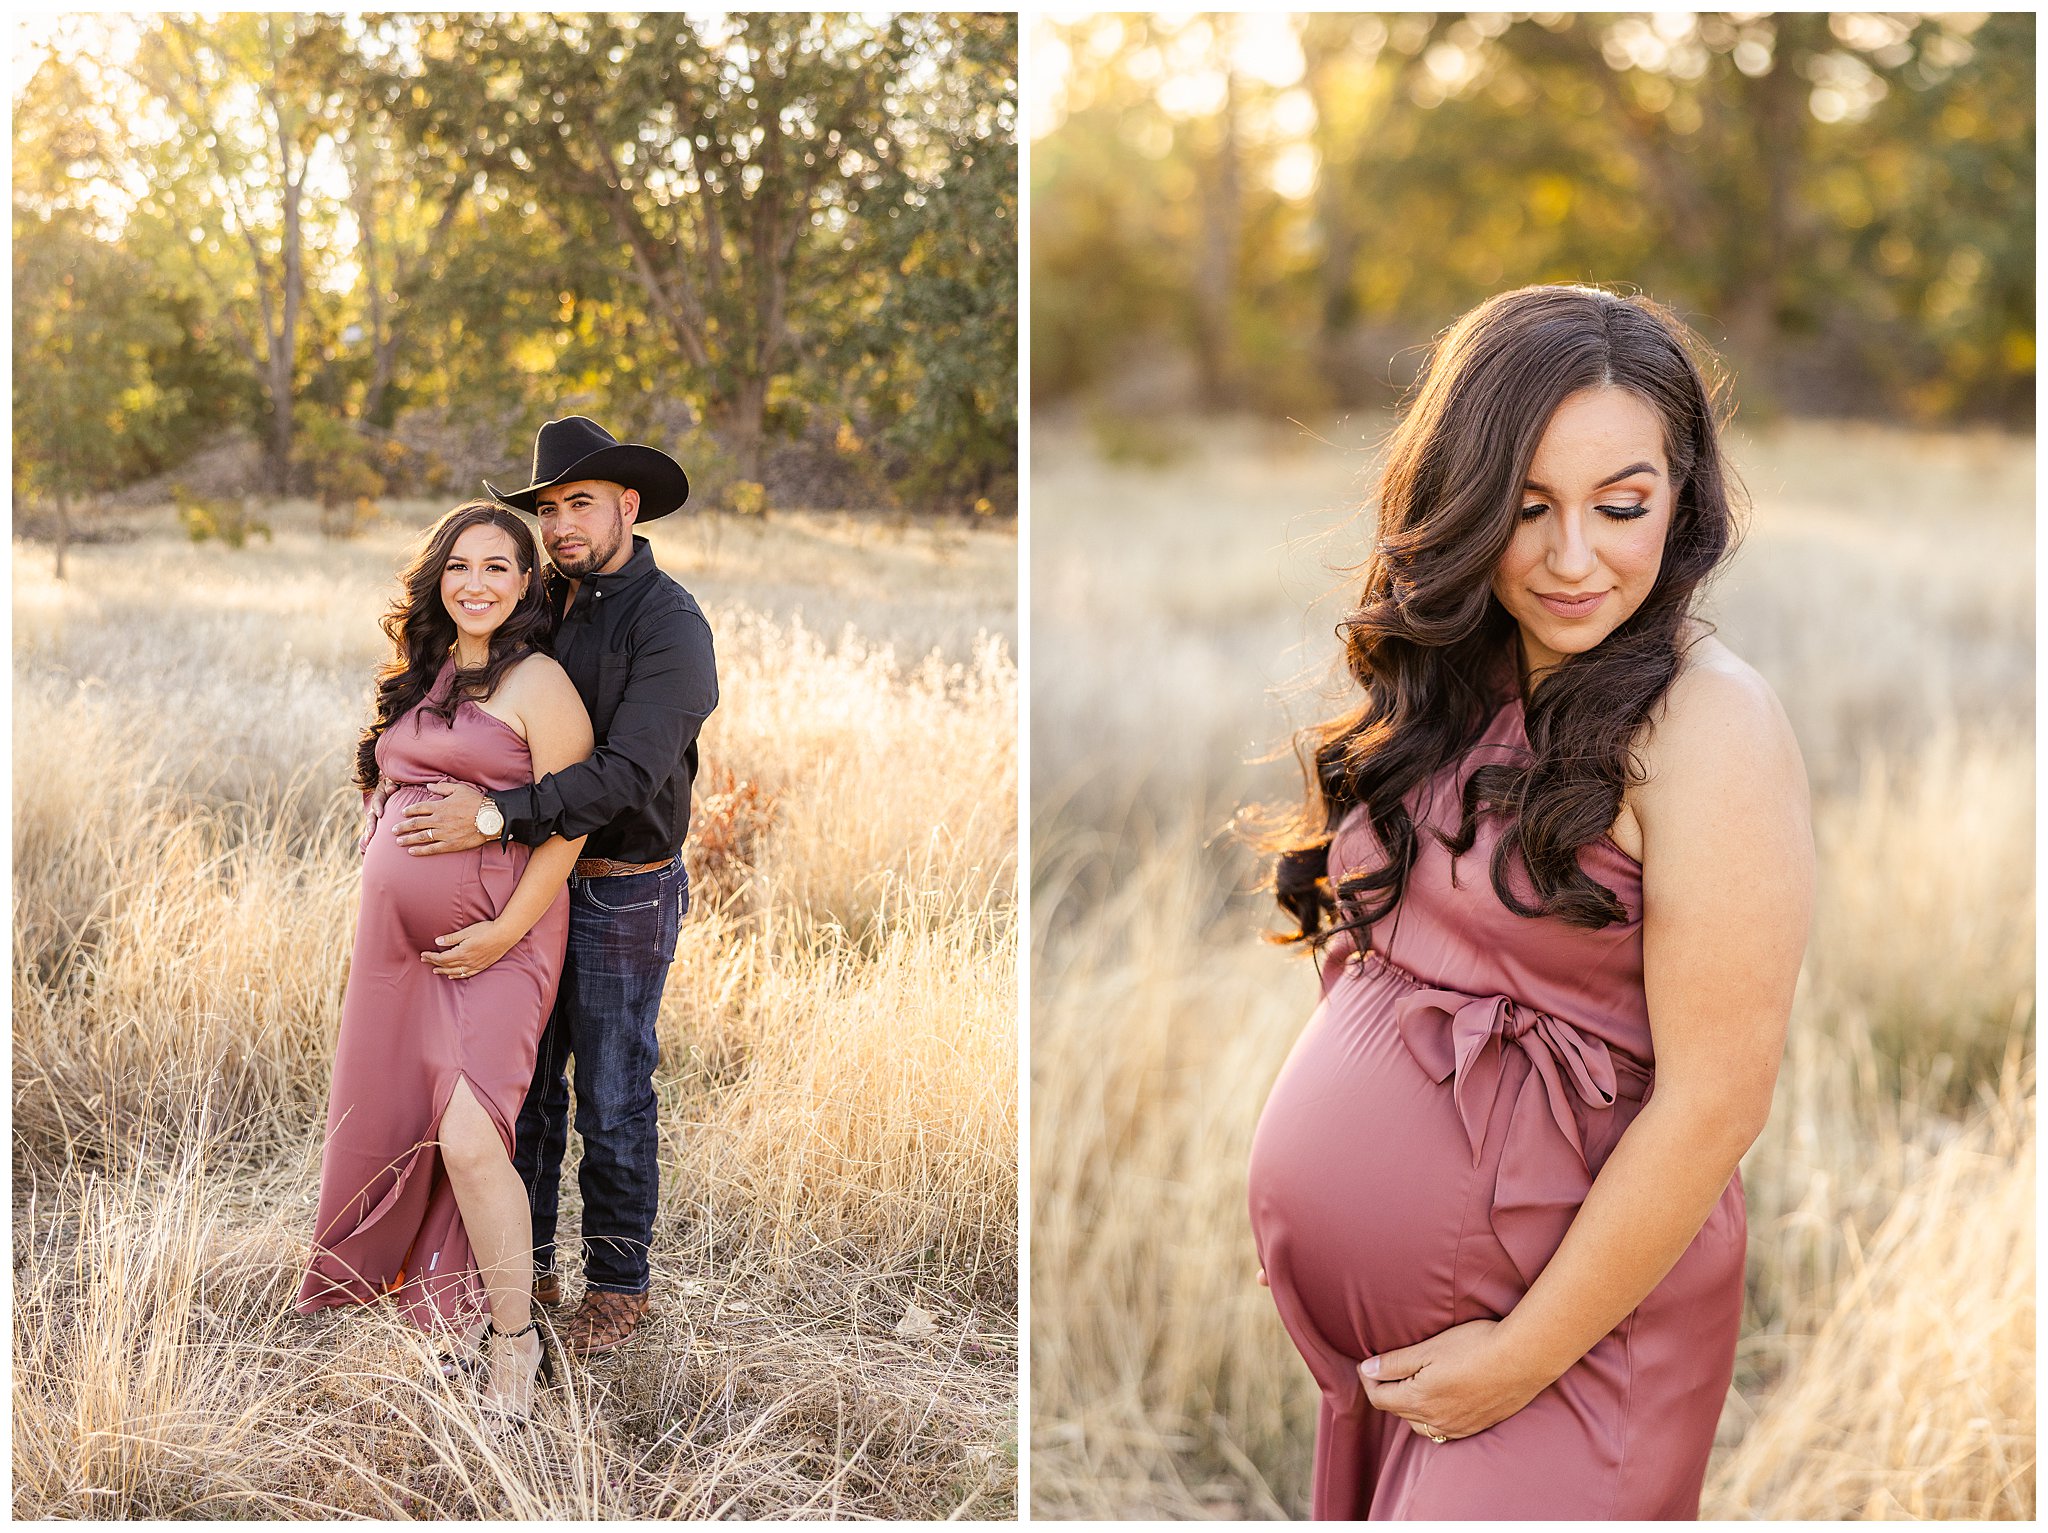 Grass Field Family Maternity Session Couple Chico CA Fall October Pink Dress Black Cowboy Hat,